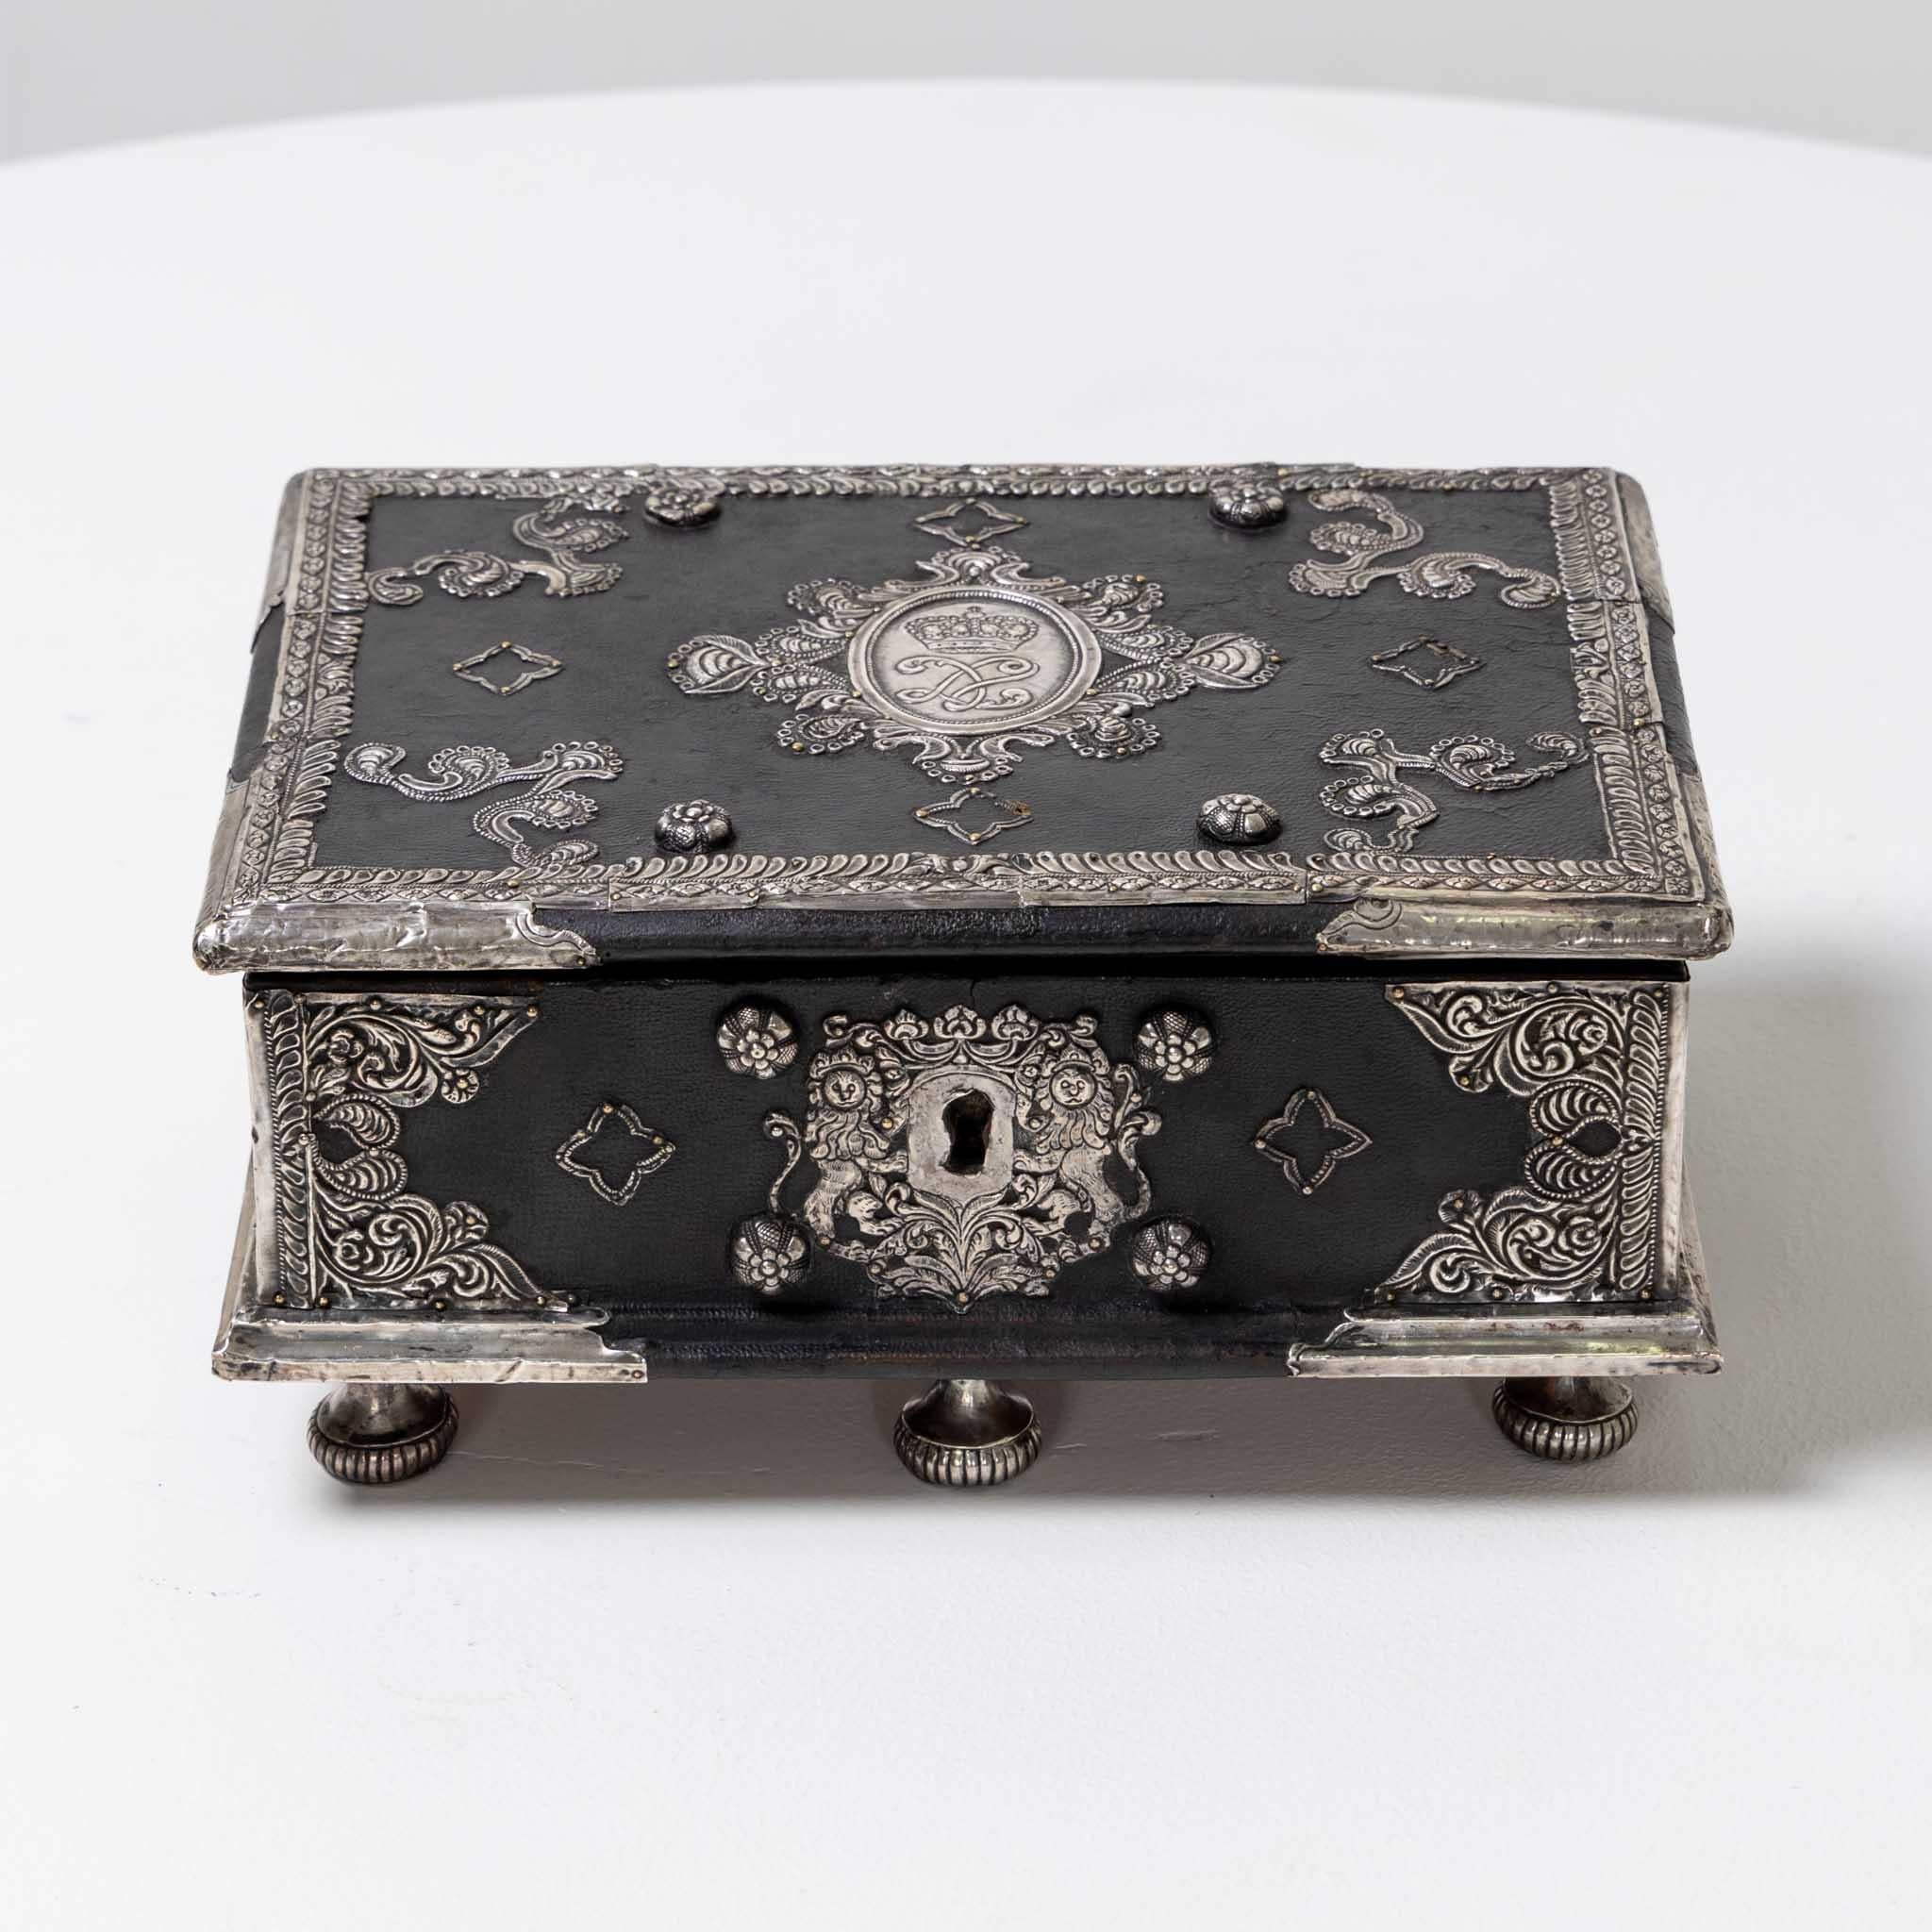 Small Indian lidded casket made of sandalwood. The chest is covered in leather and decorated with silver fittings with handles on the sides. The interior is lined in red velvet. Key present.